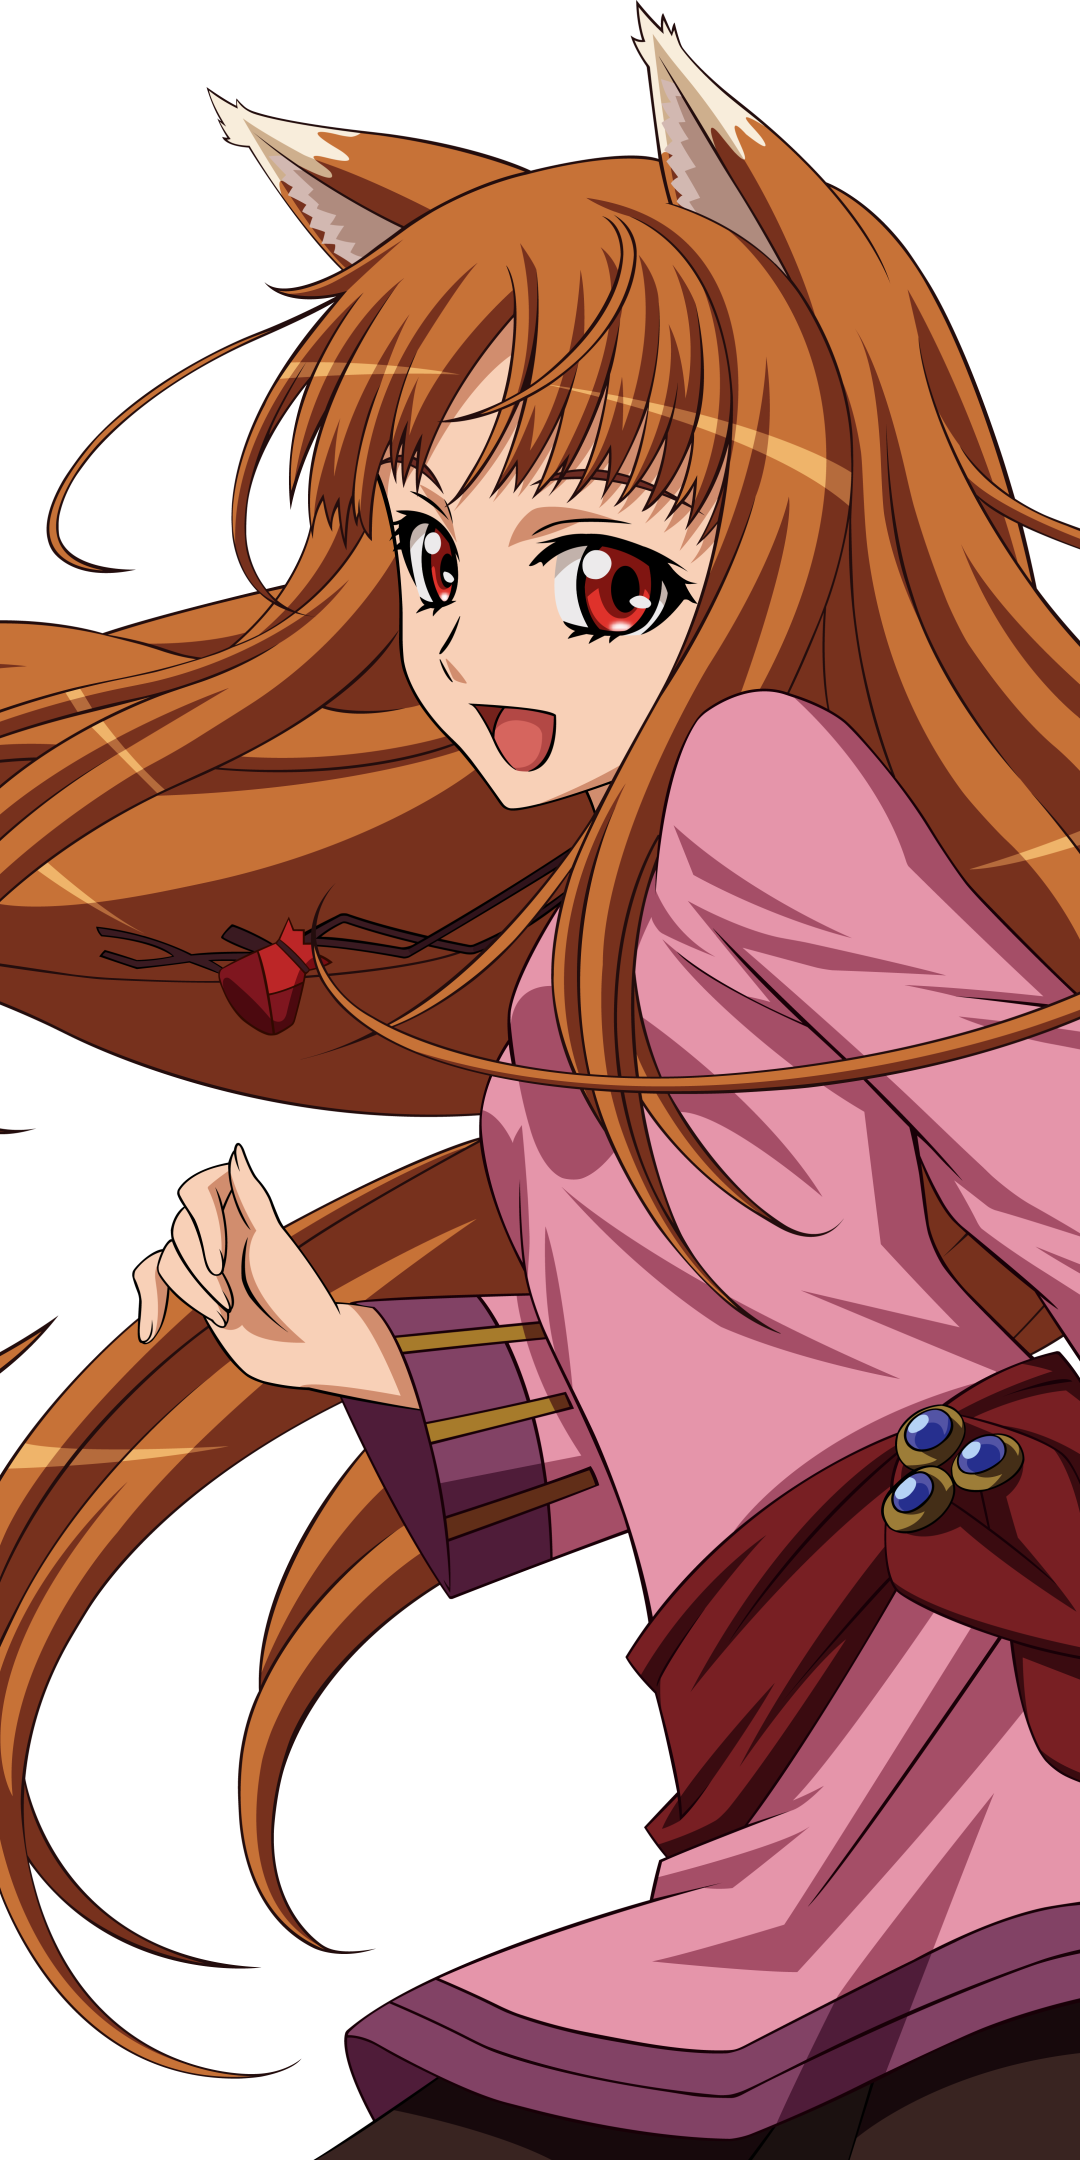 Spice and Wolf Phone Wallpaper